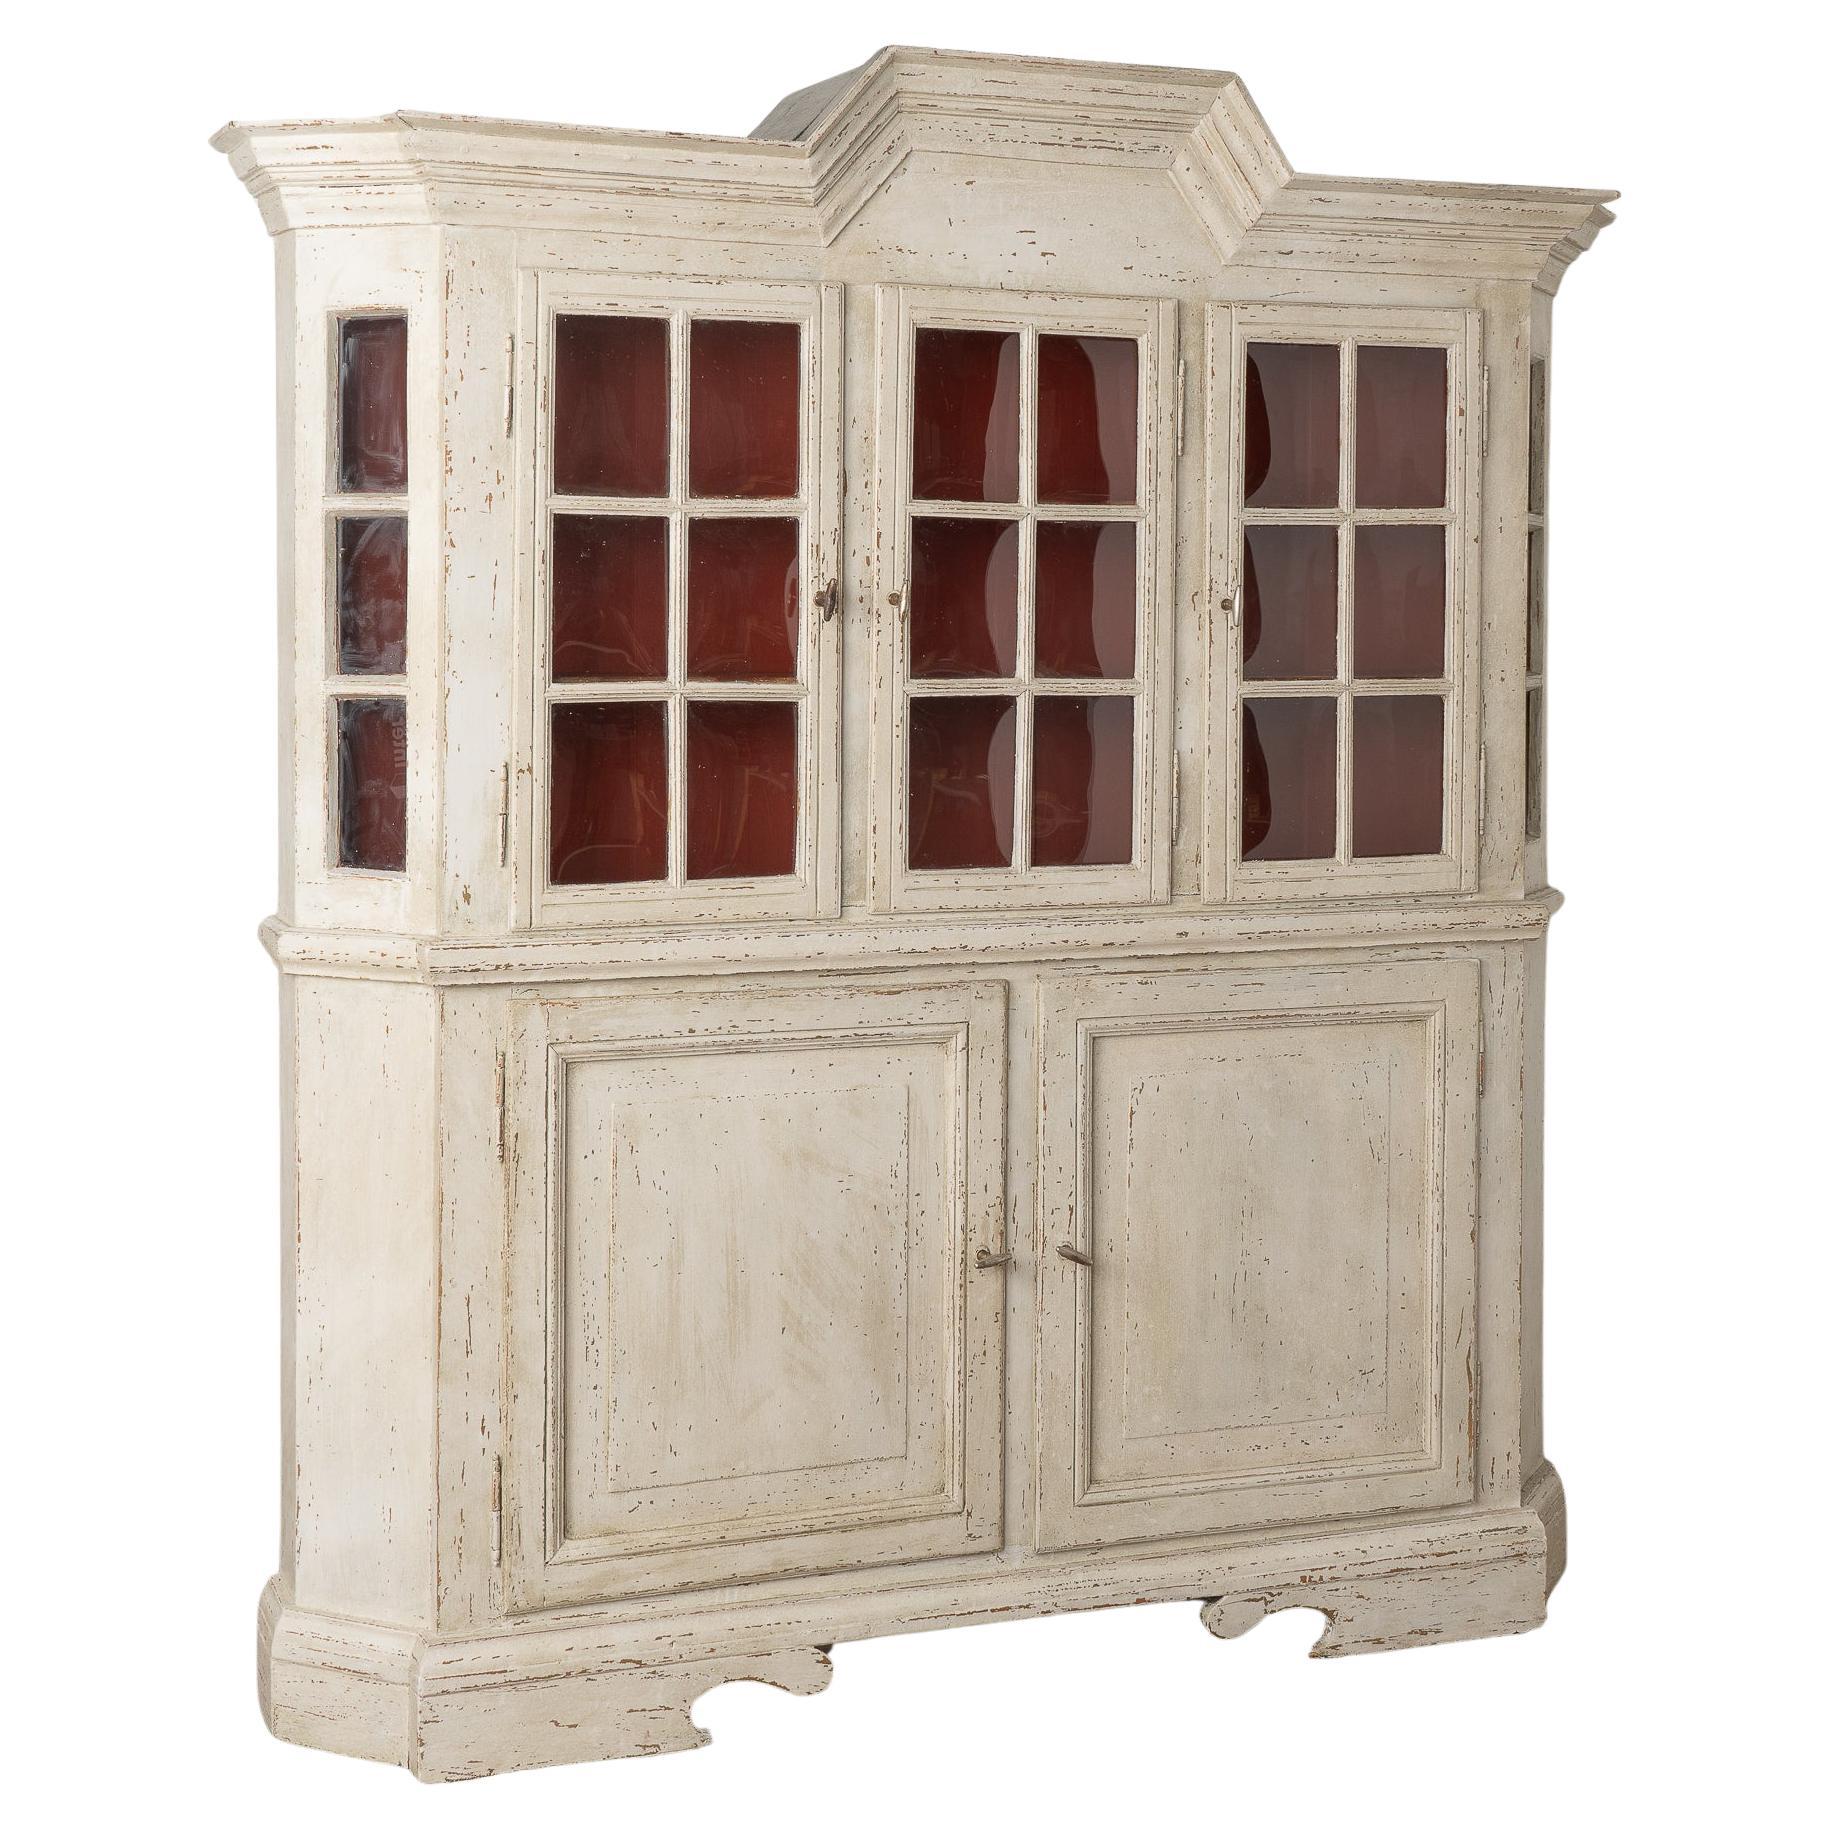 White Display Cabinet Cupboard with Pane Glass Doors, Sweden circa 1860-80